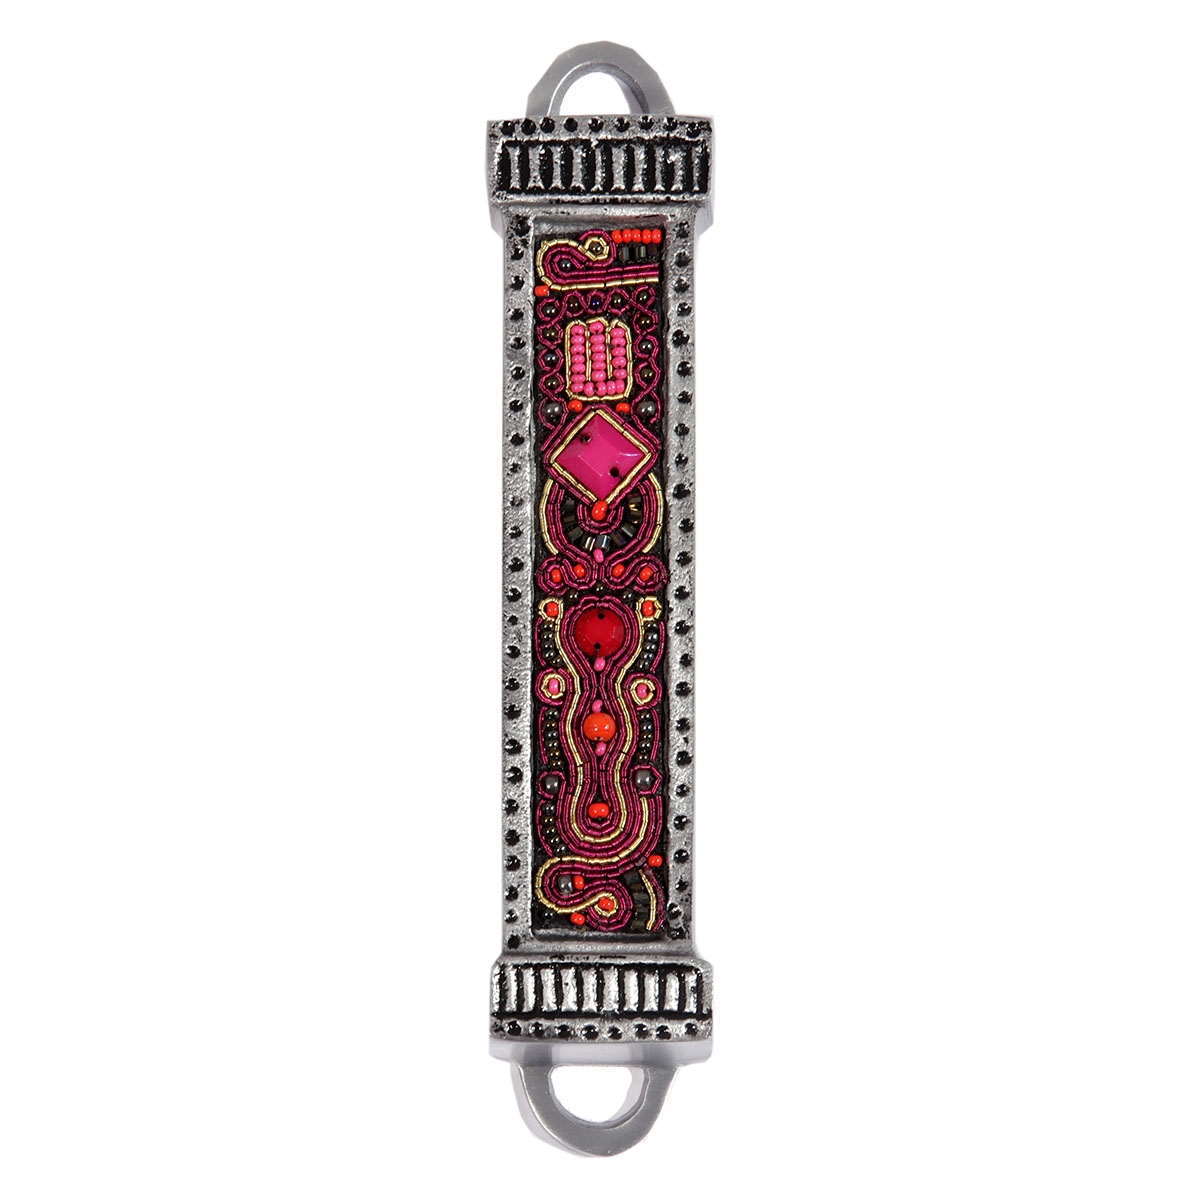 Yair Emanuel Aluminum Mezuzah with Embroidered Beads - Red - 1